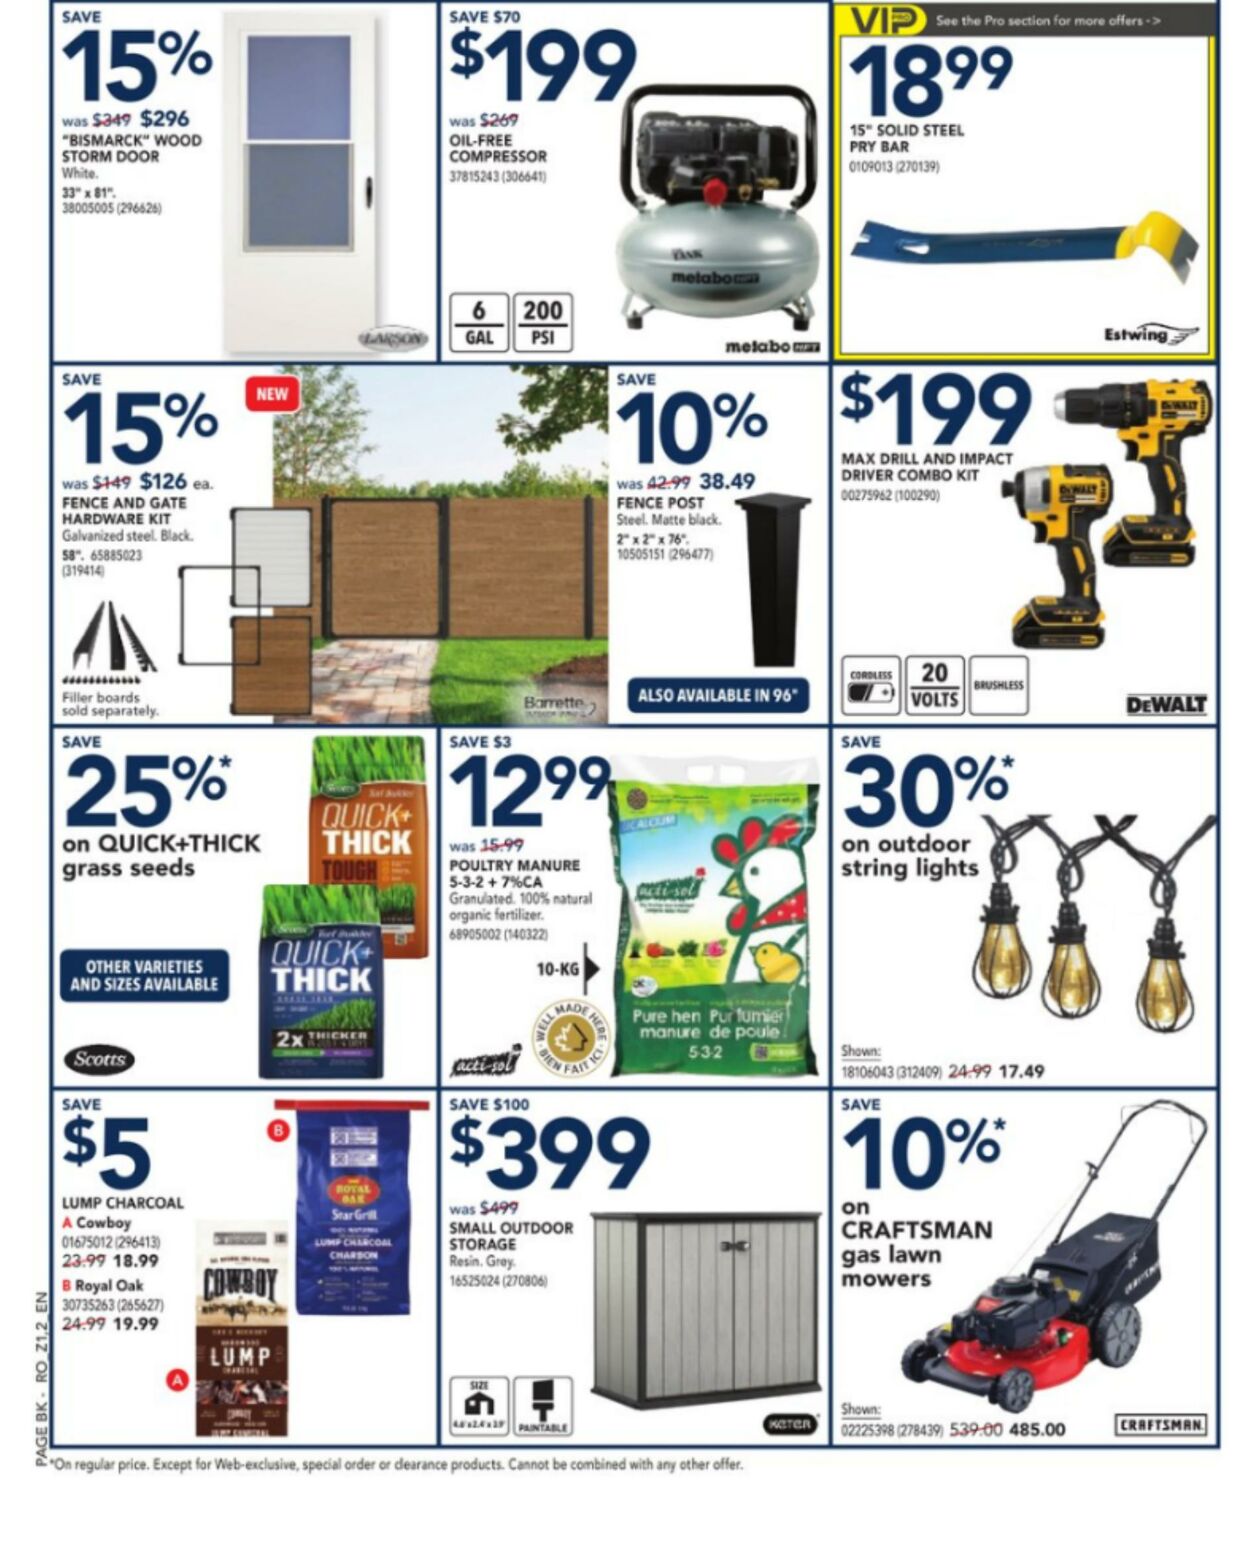 RONA Flyer from 03/28/2024